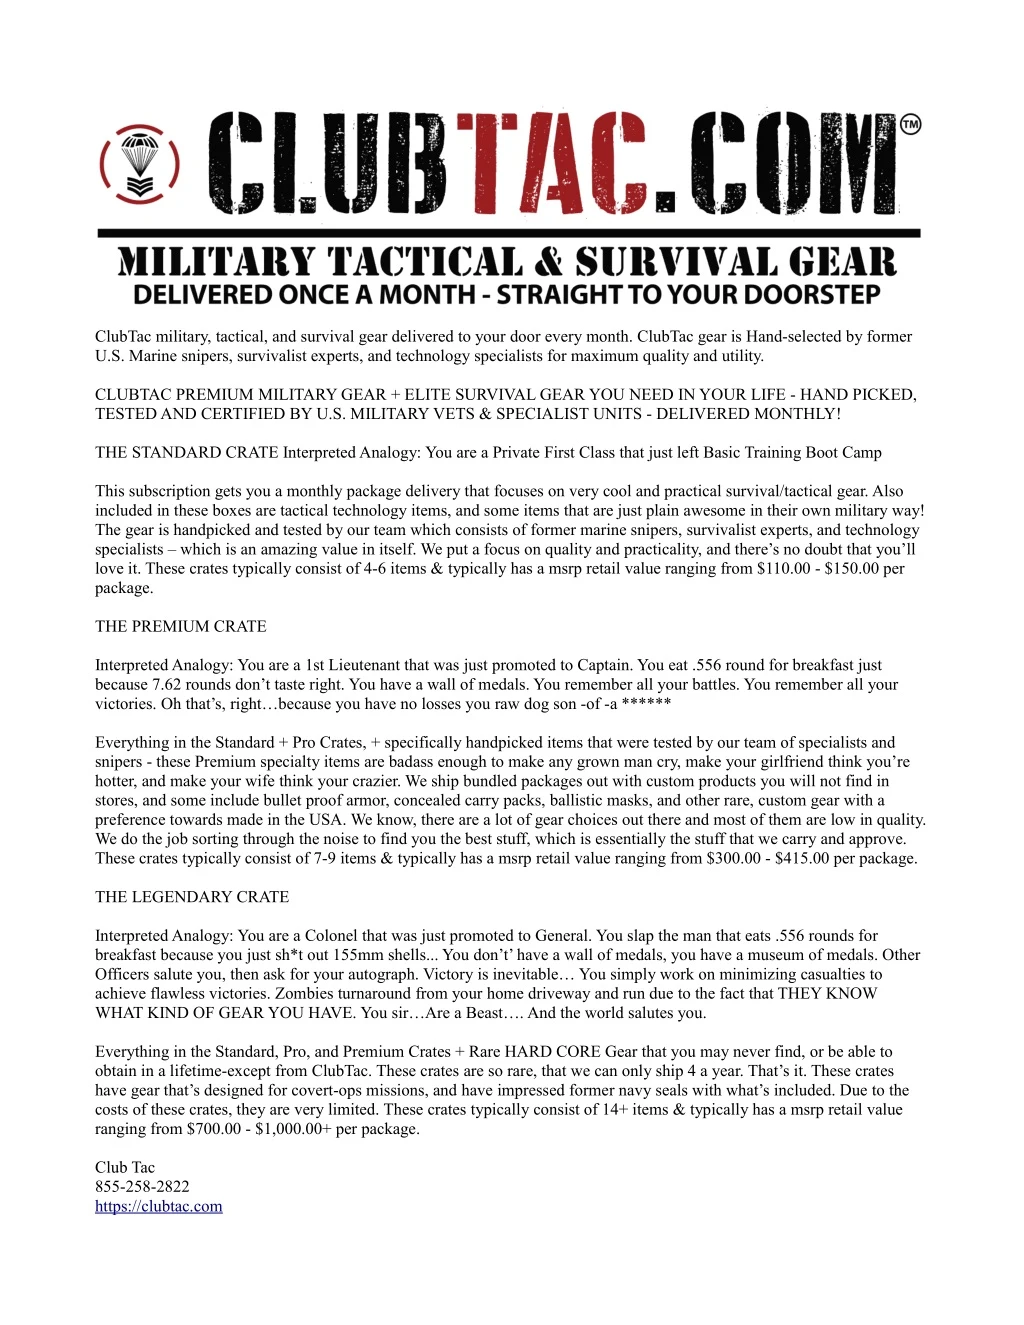 clubtac military tactical and survival gear